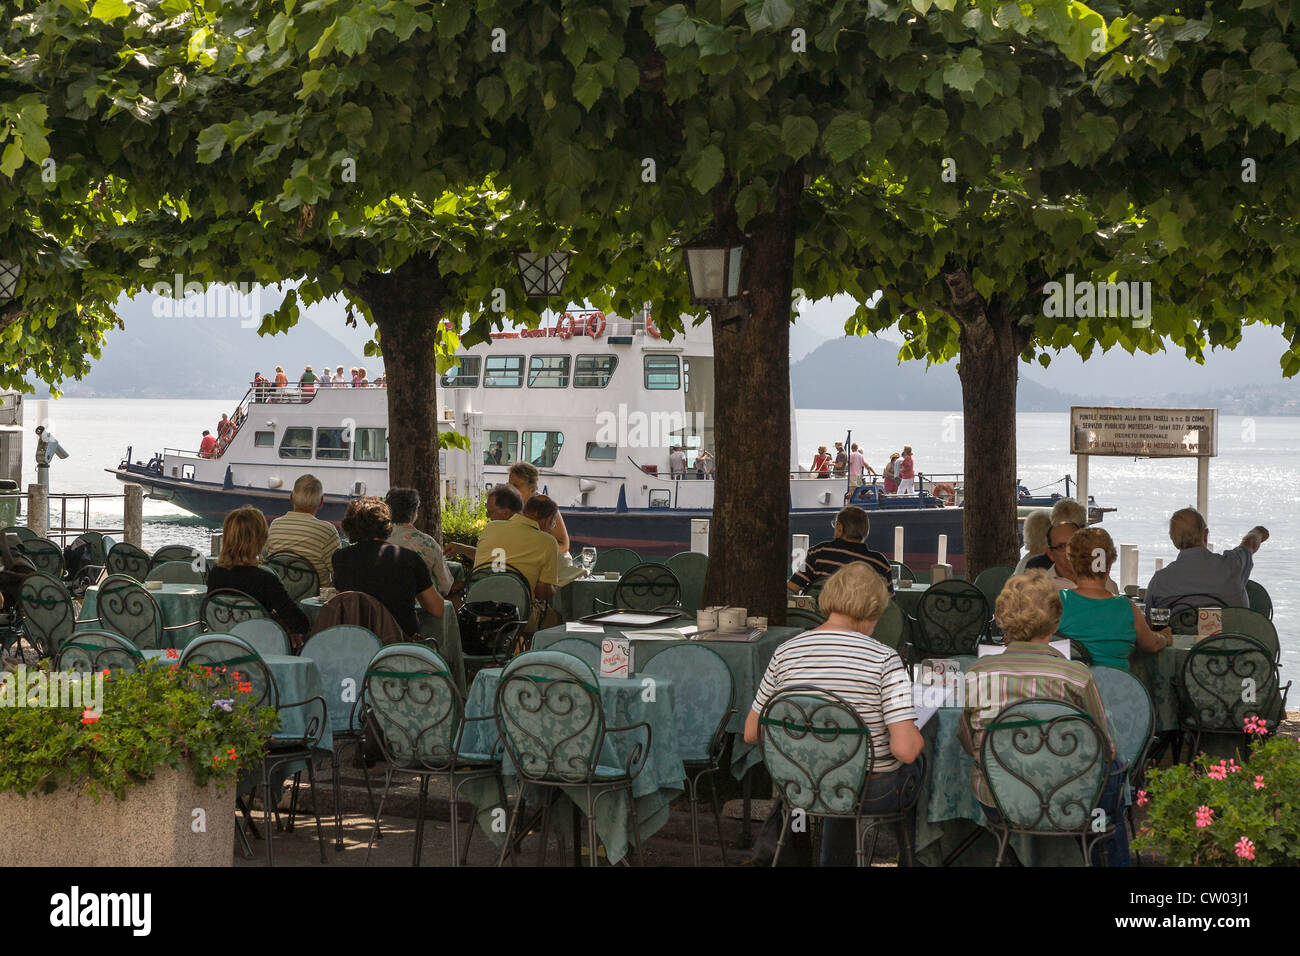 Lakeside cafe/restaurant under trees in Bellagio on Lake Como in Italy Stock Photo